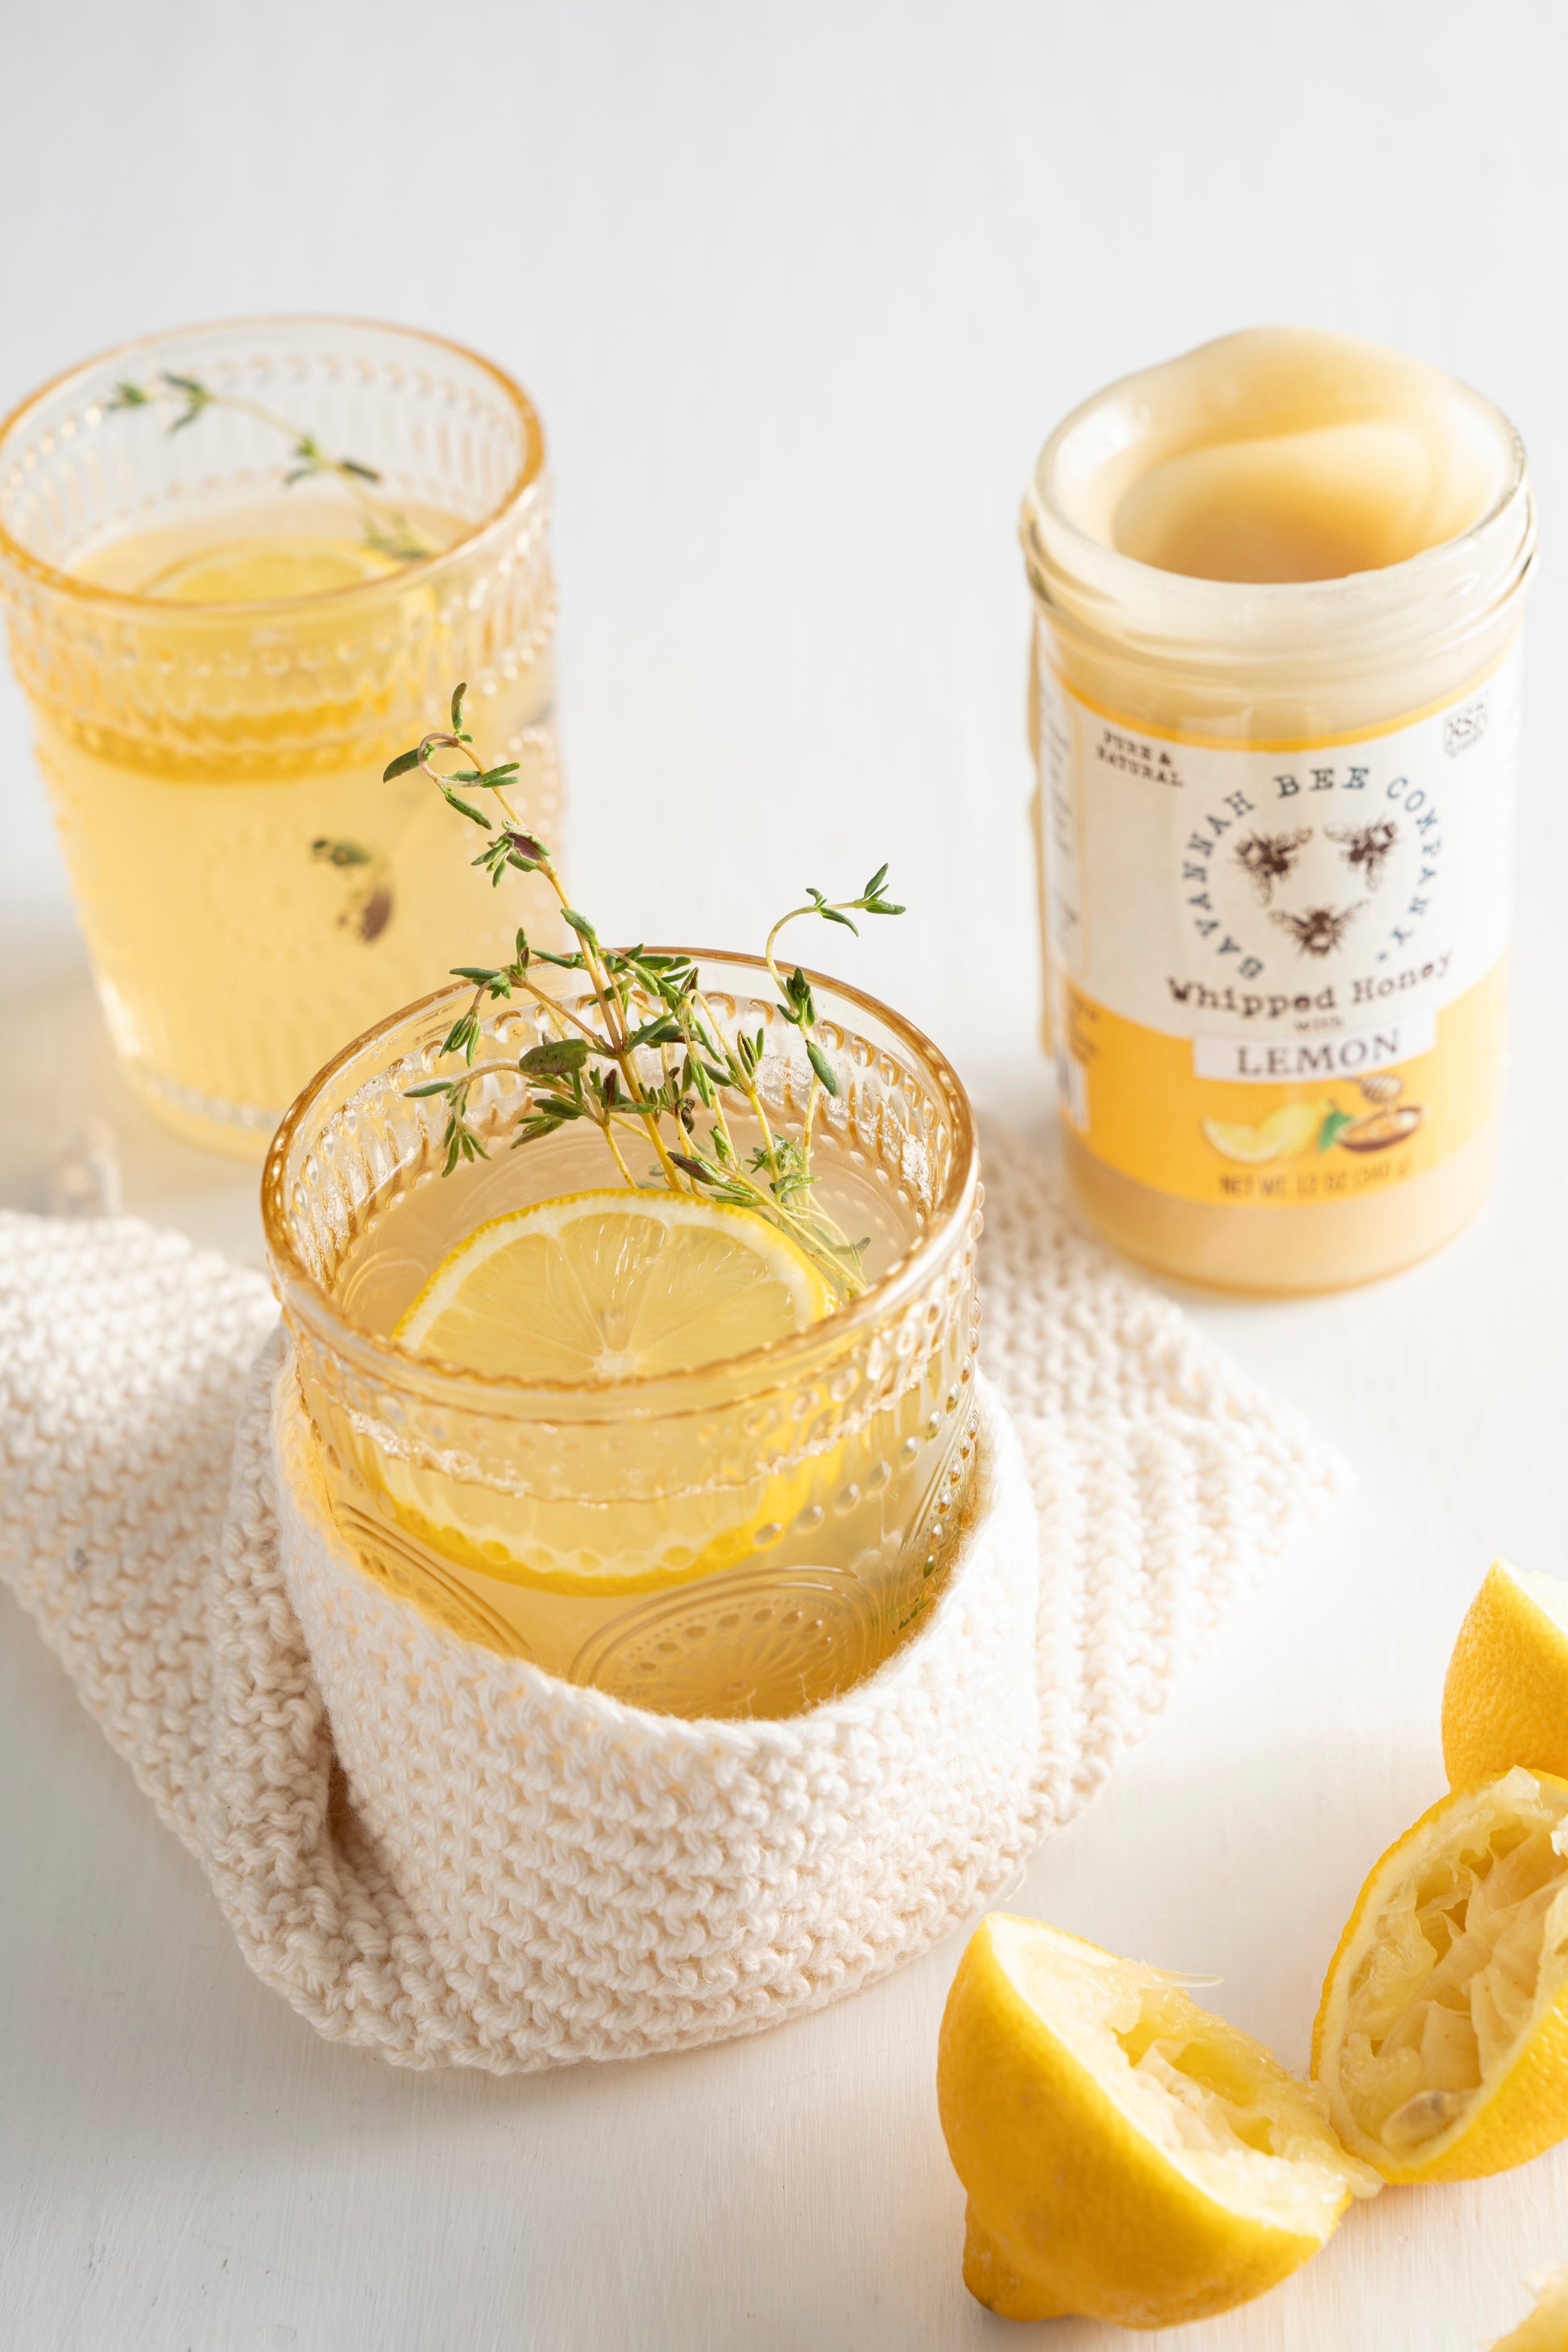 Whipped Honey with lemon next to a lemon toddy with lemon slice and a sprig.